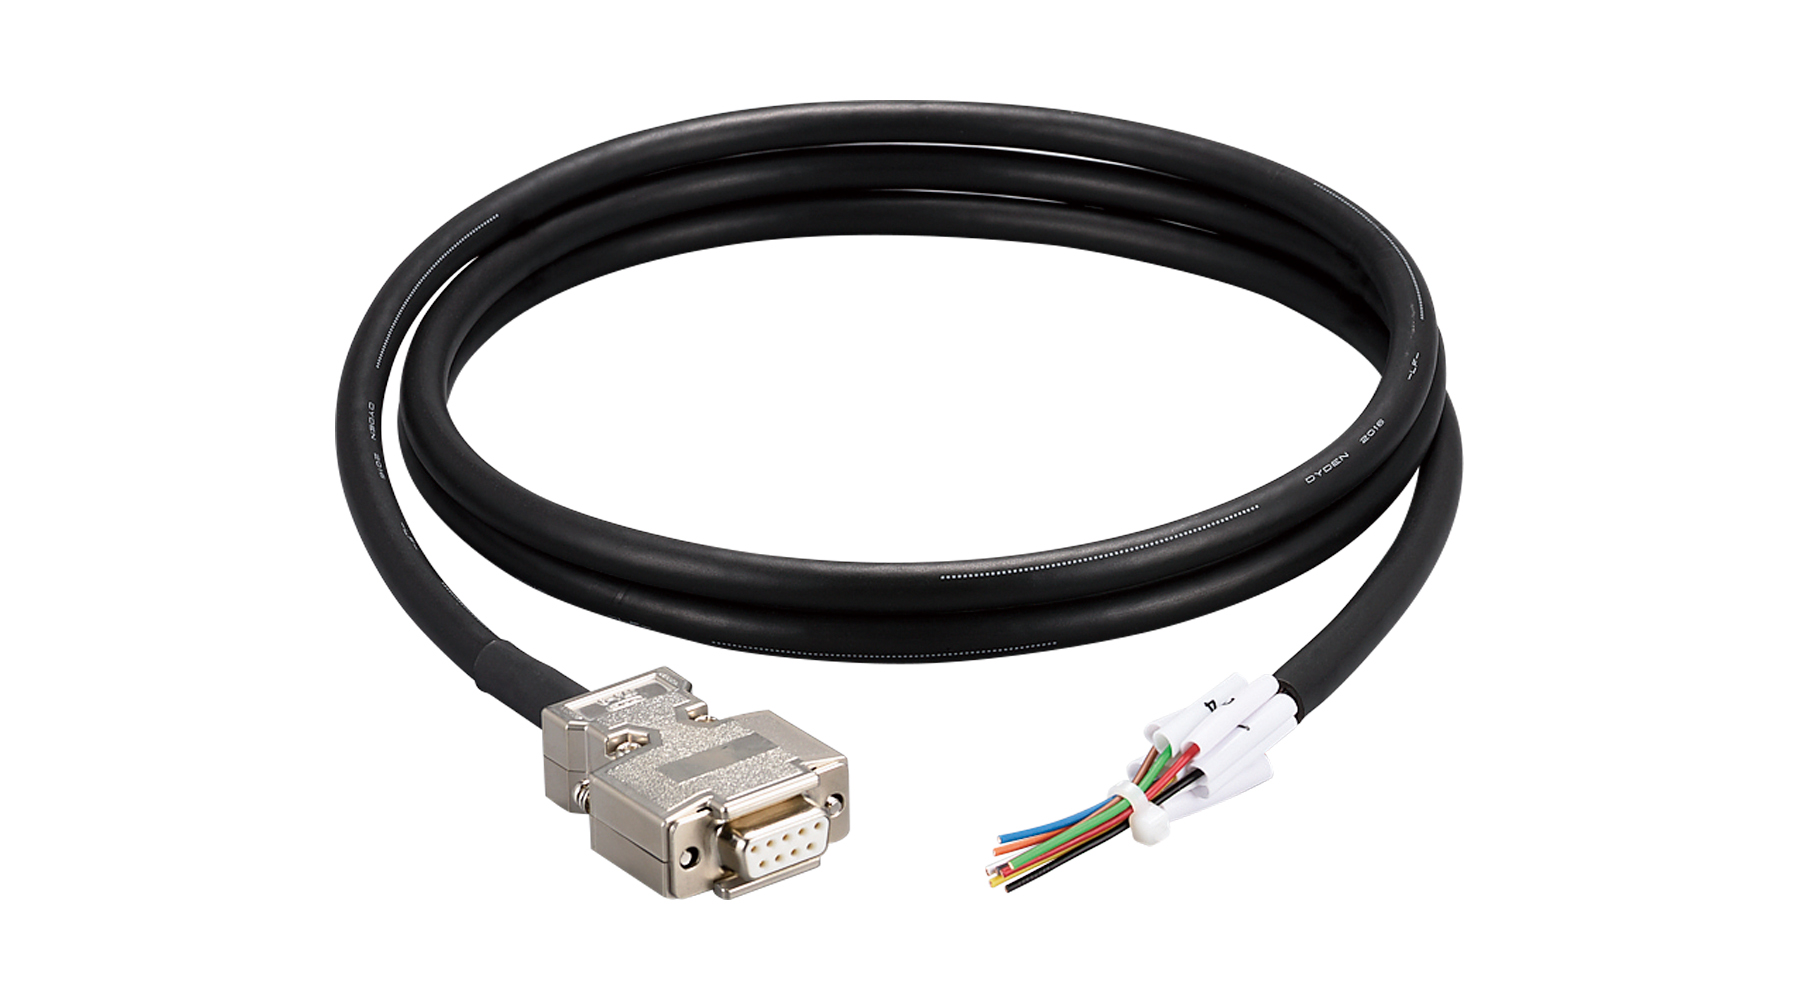 D-SUB CABLE FOR OX